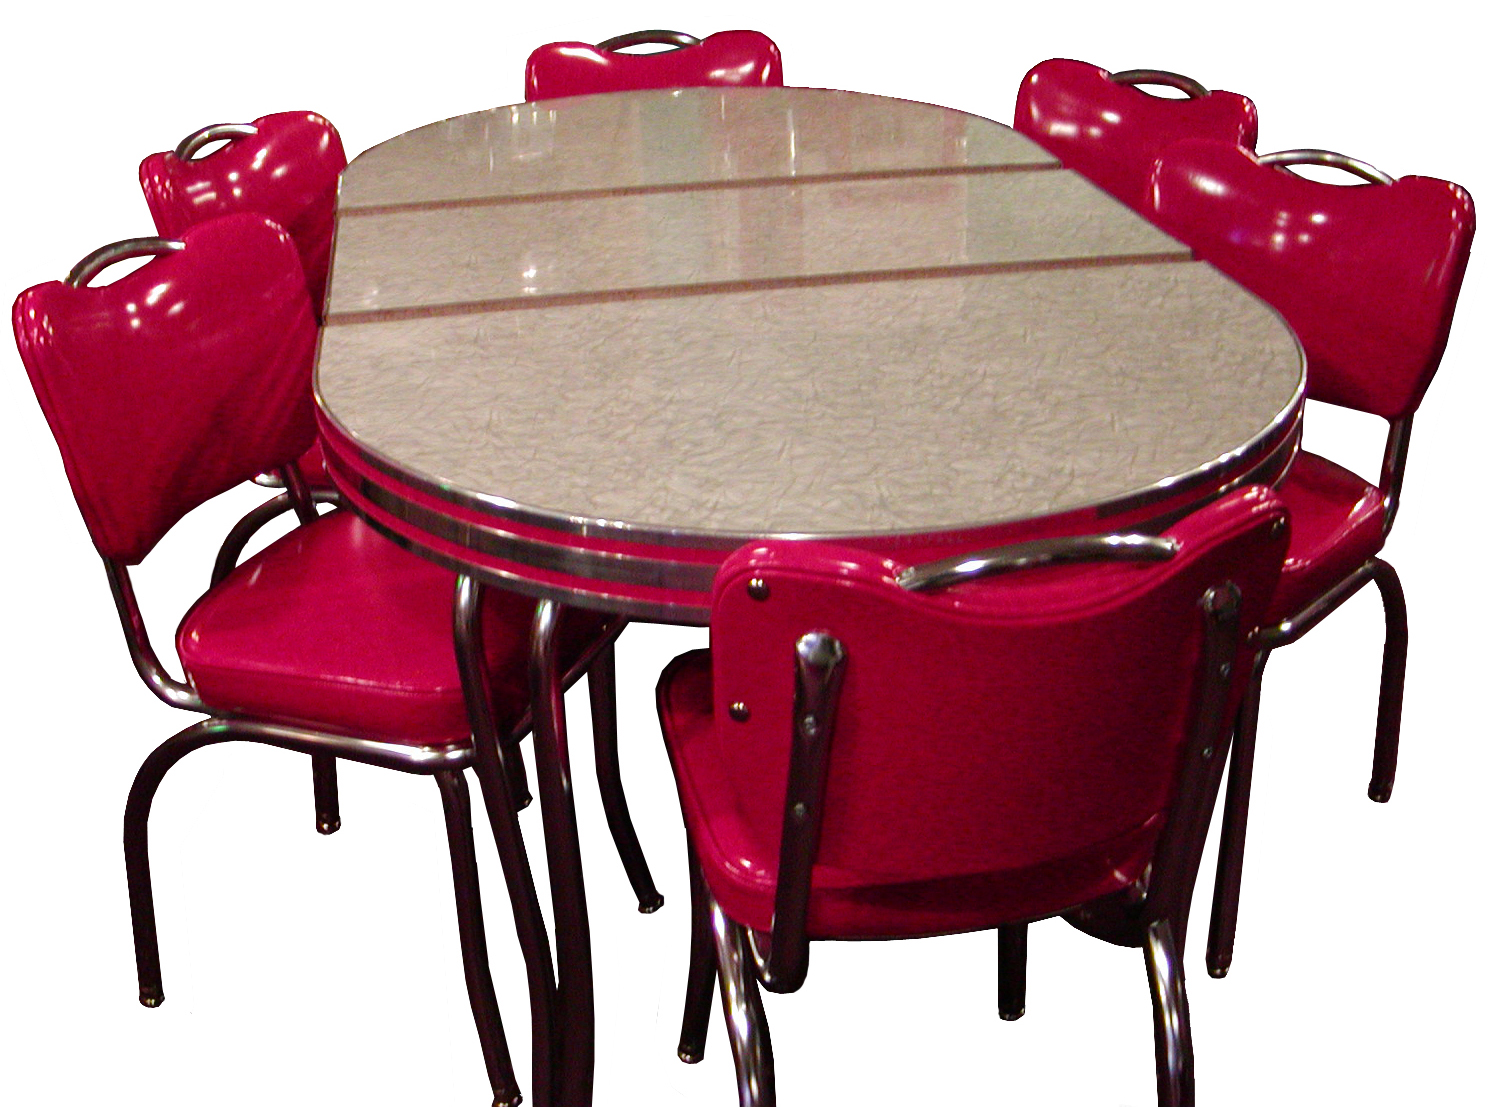 red retro kitchen table chairs photo - 4